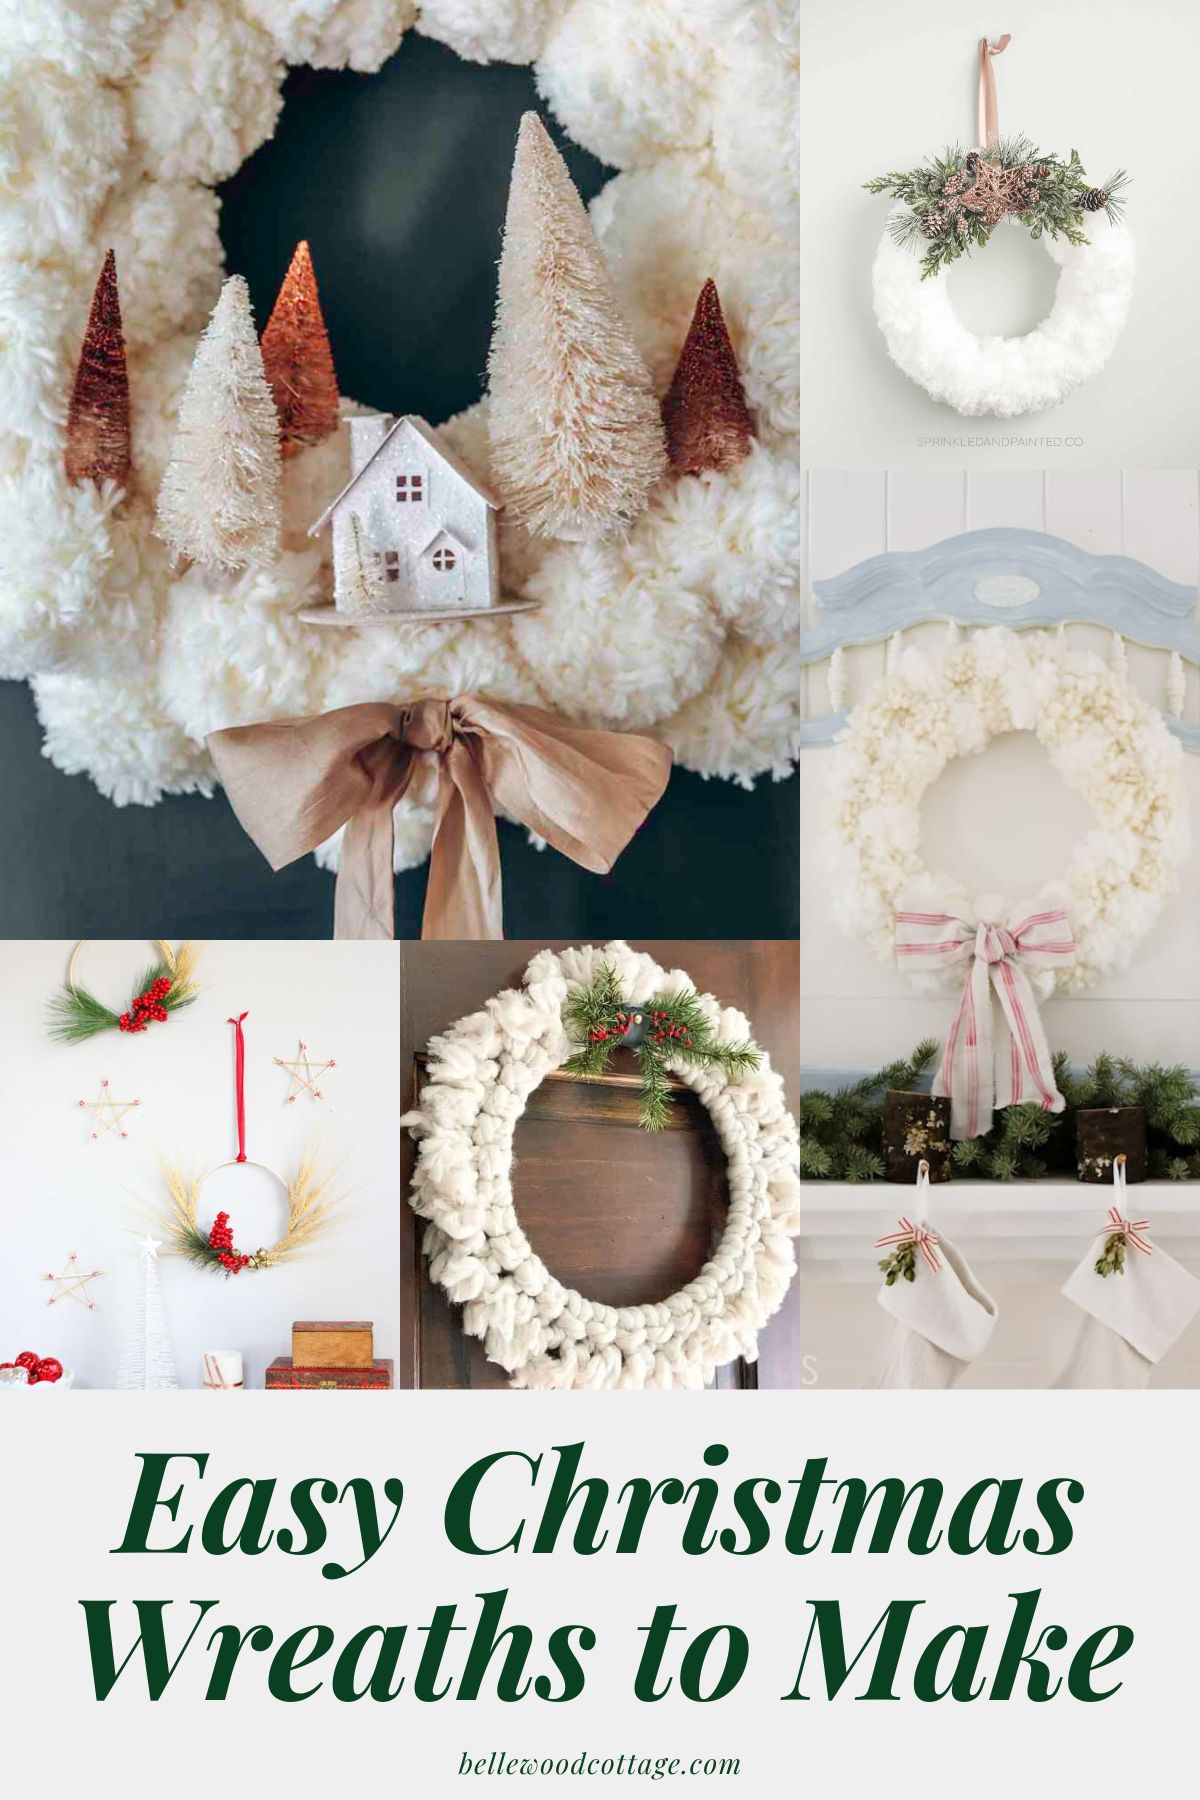 A collage of festive Christmas wreaths with the words, "Easy Christmas Wreaths to Make".